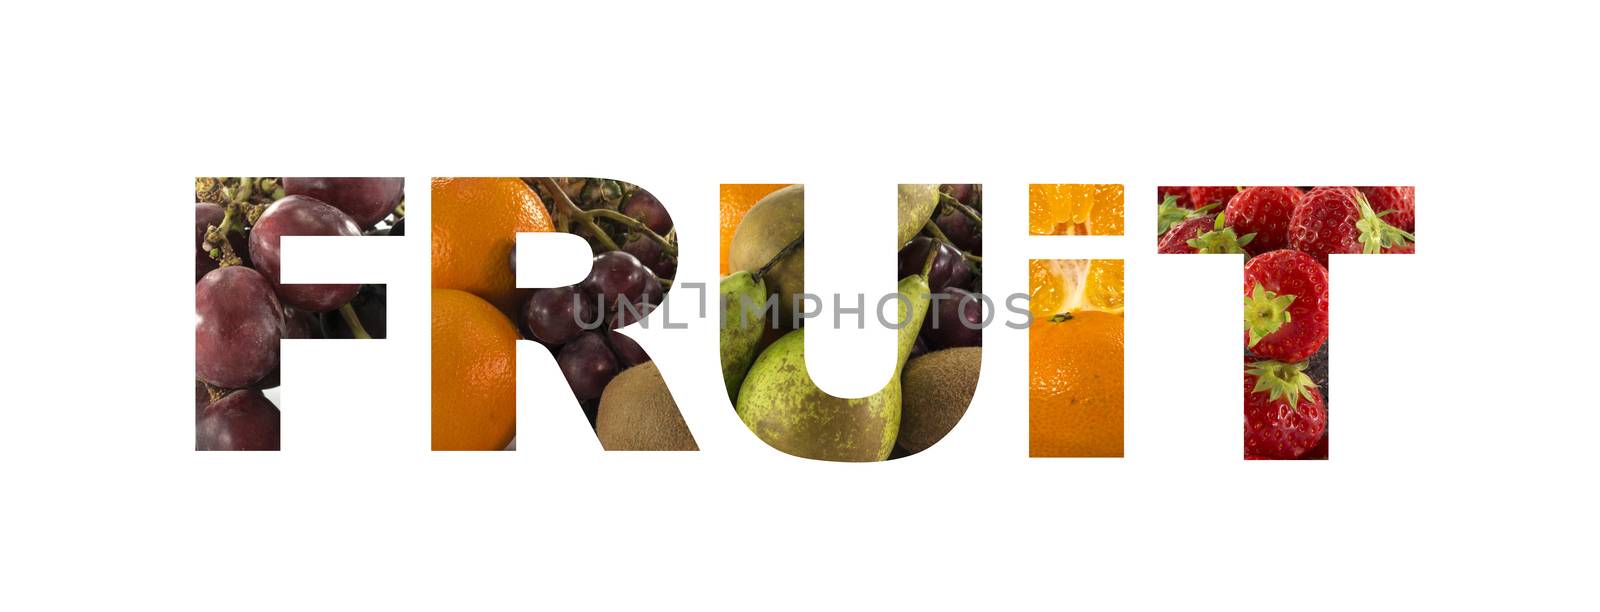 the wordt fruit, made from fresh fruit photos as grapes oranges and others
